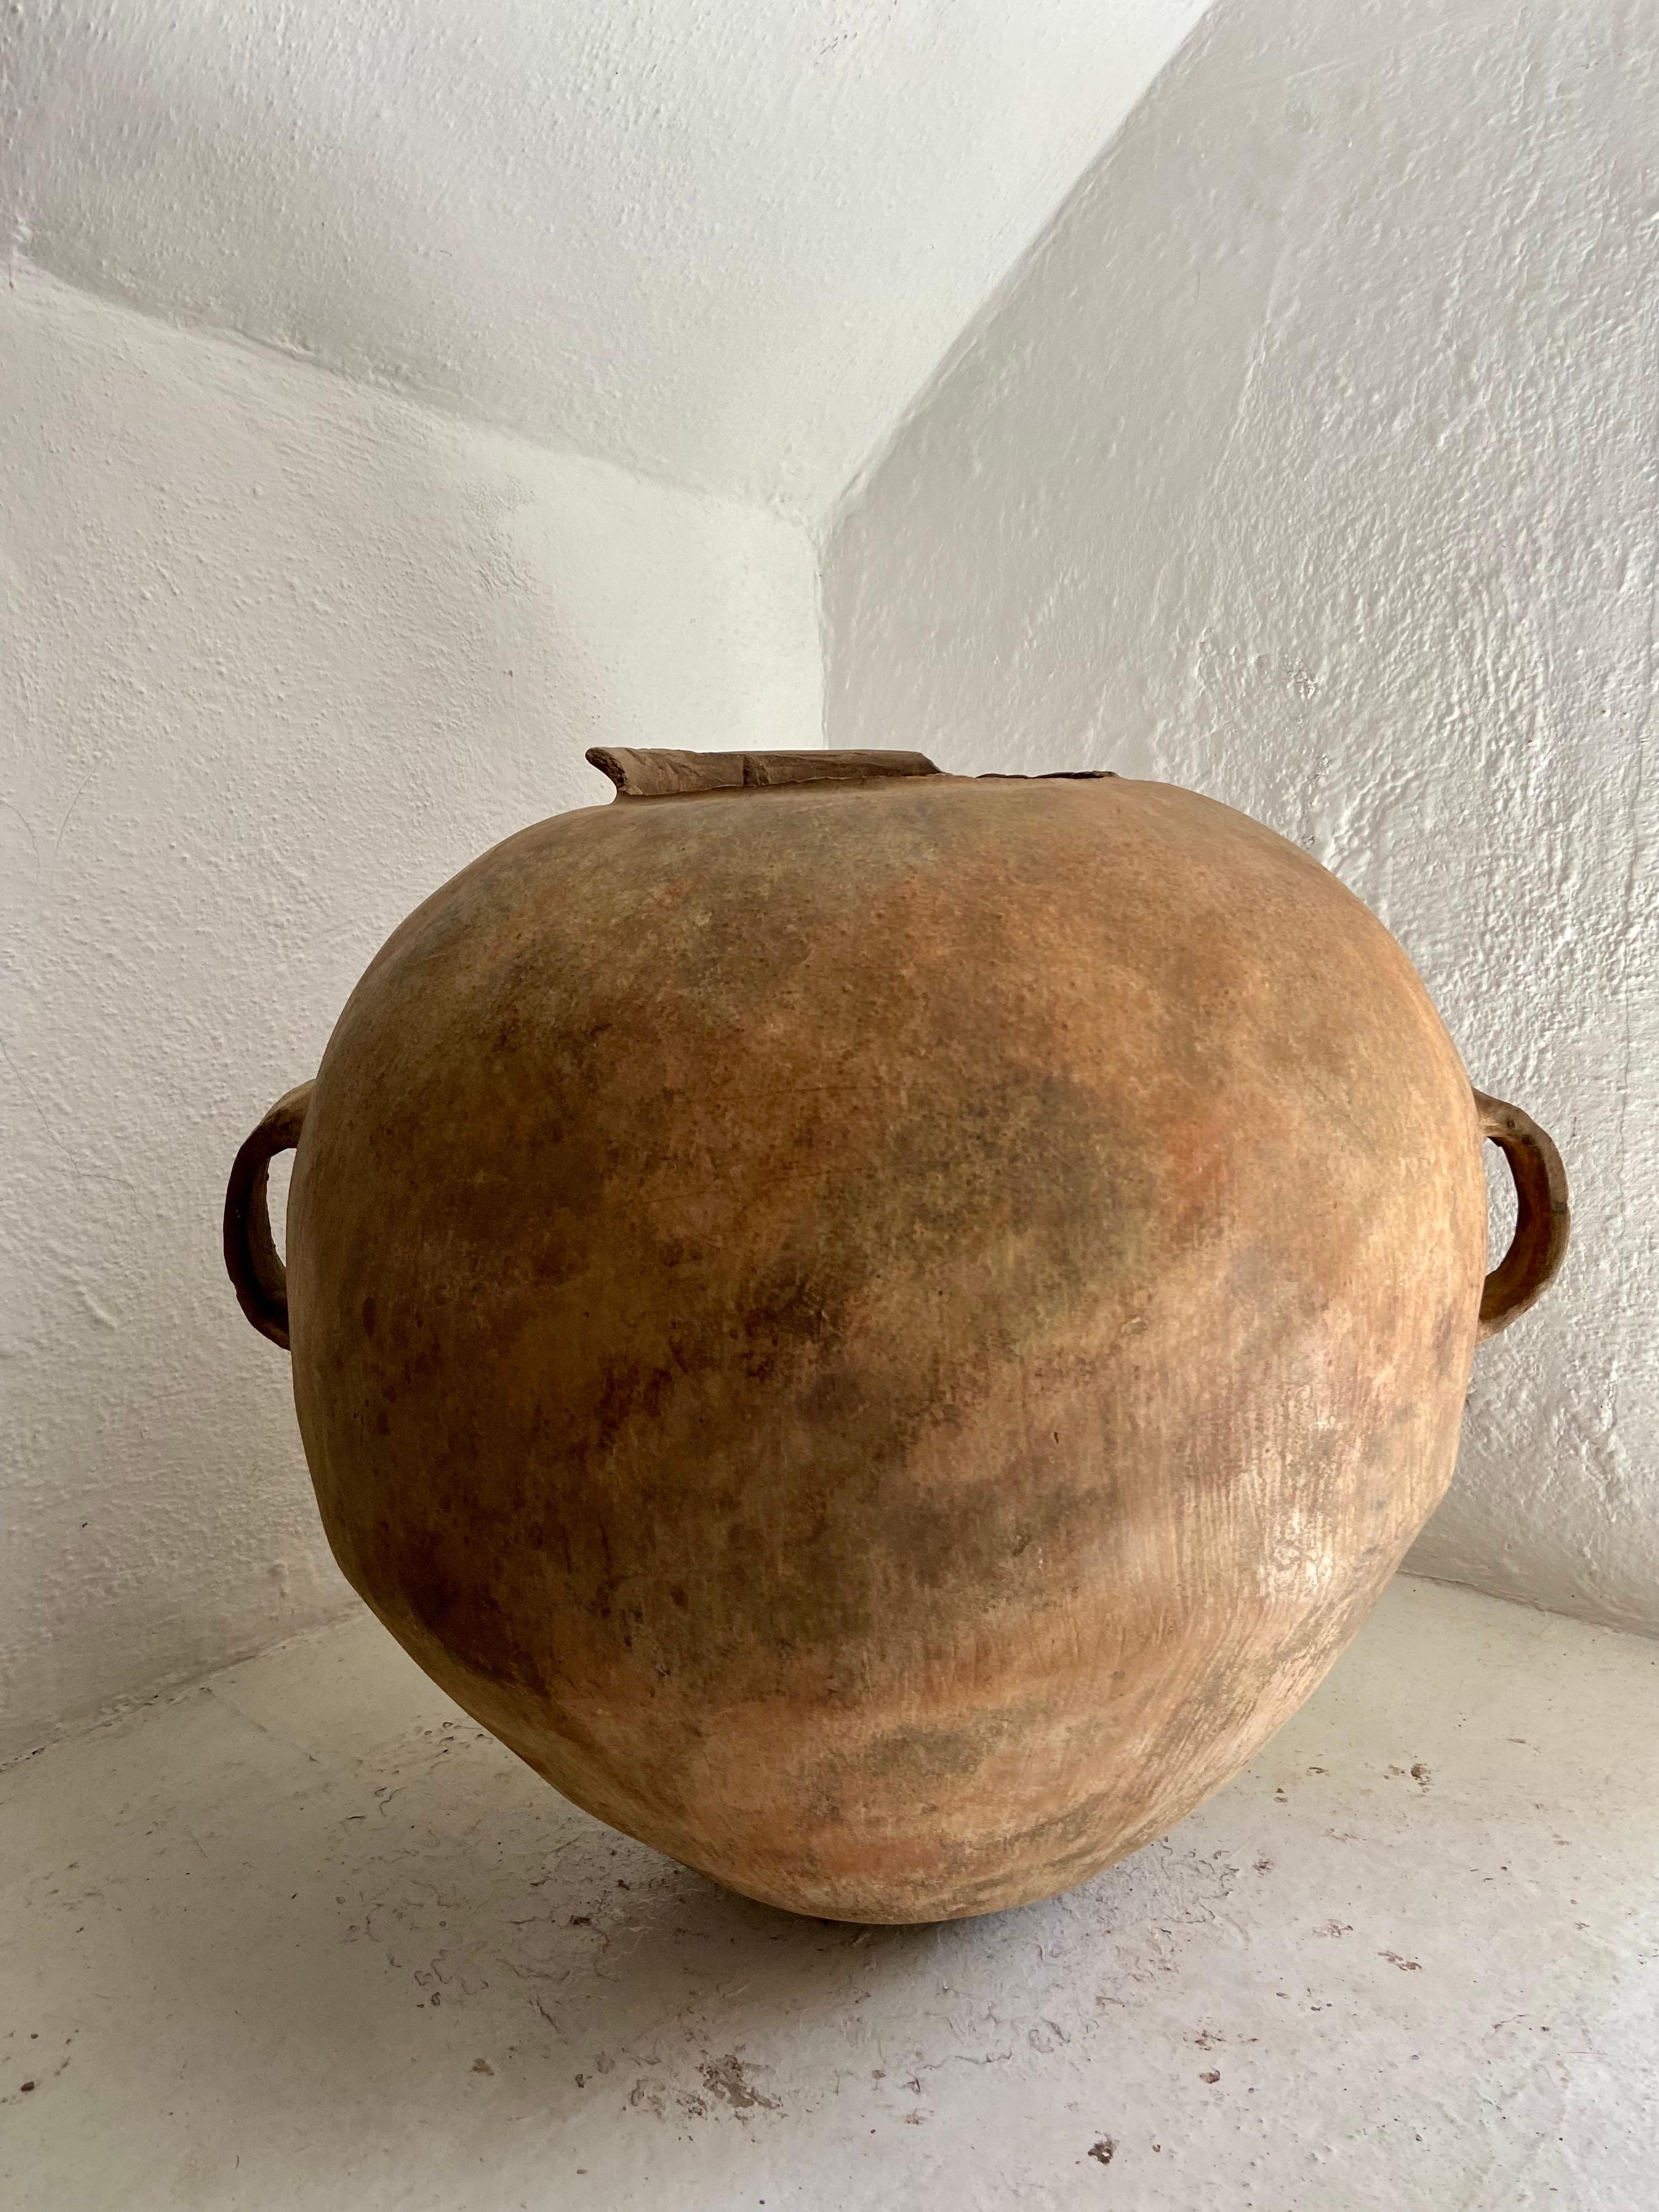 Early 19th century terracotta water jar from Norther Puebla, Mexico. Unusually wide format pot with large intact handles. The majority of the neck rim has been broken off through time. The pot has a warm, muted orange color.